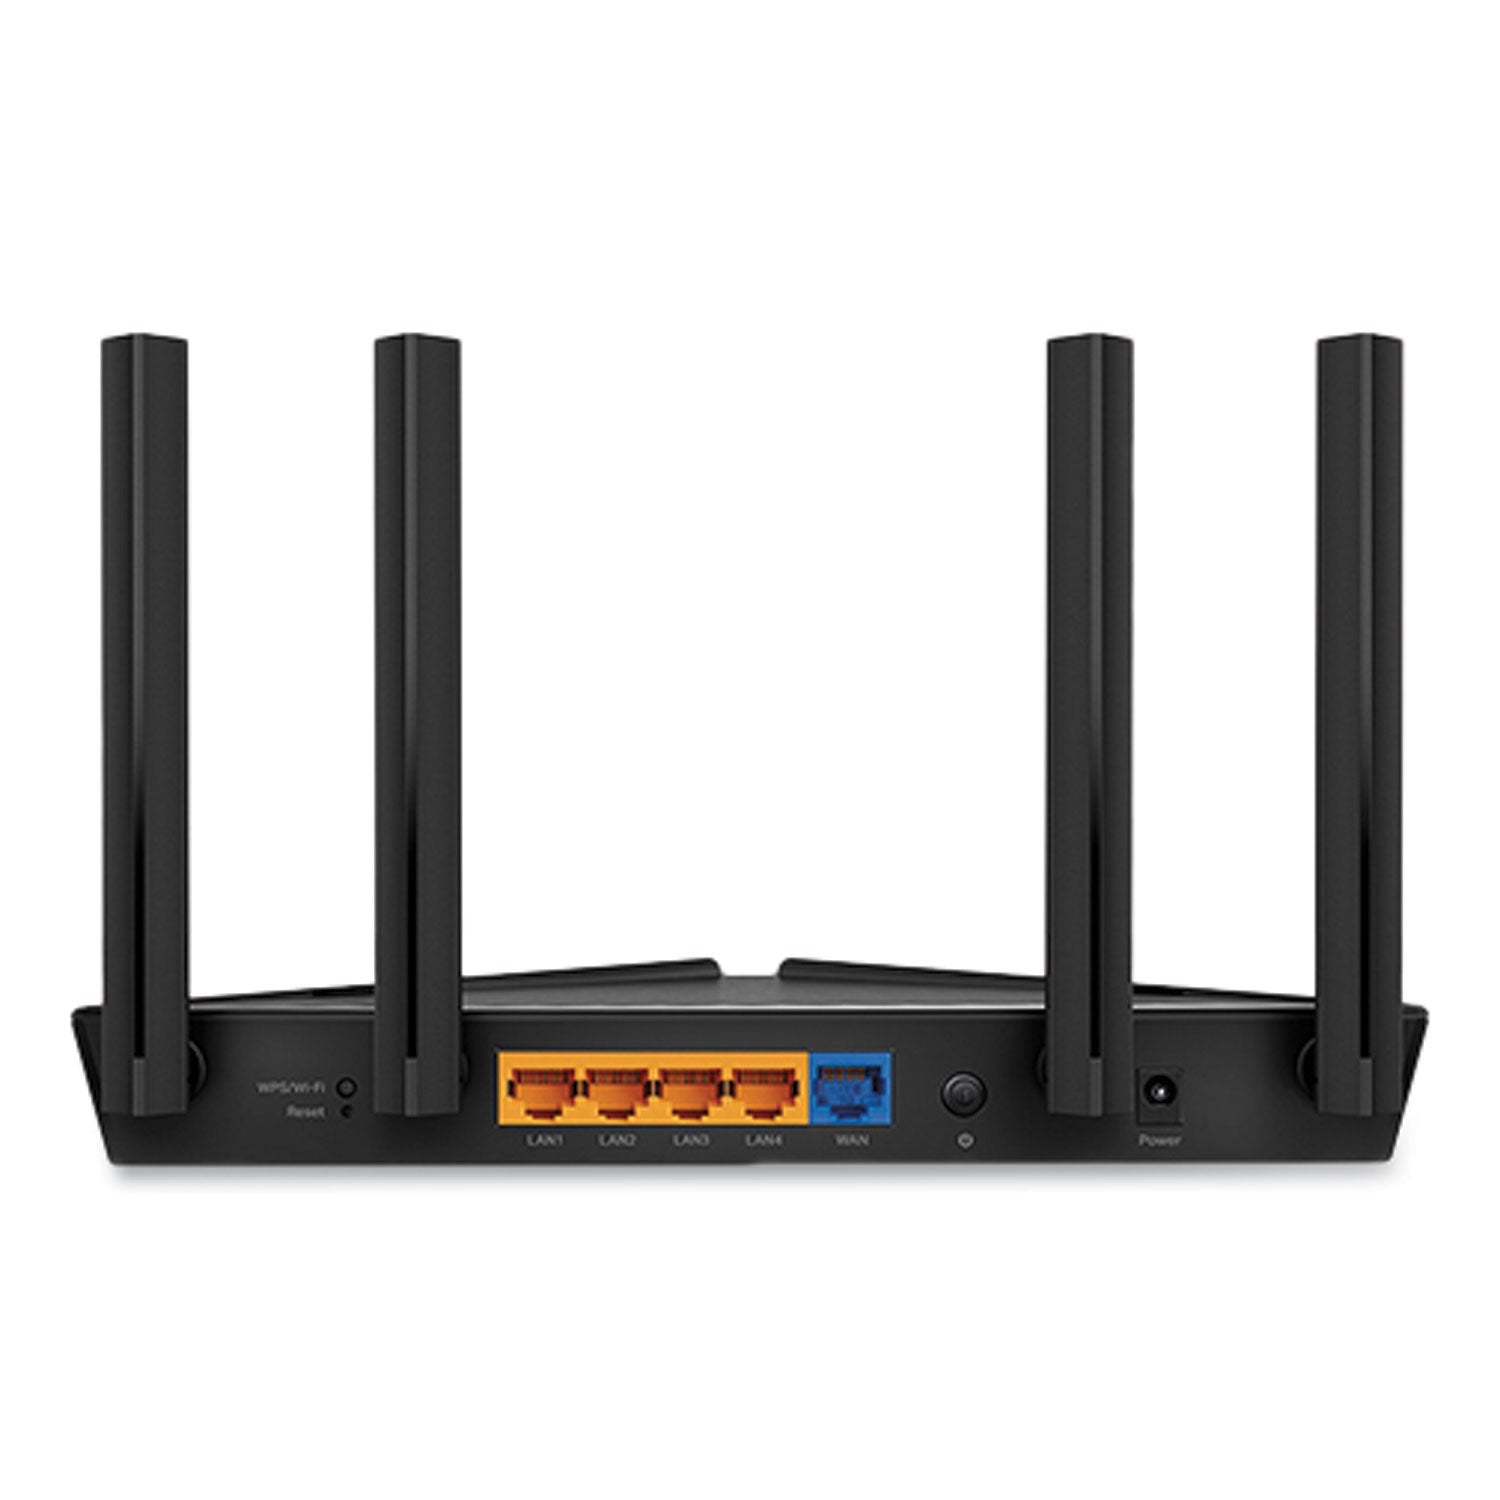 archer-ax1500-wireless-and-ethernet-router-5-ports-dual-band-24-ghz-5-ghz_tplarcherax1500 - 4